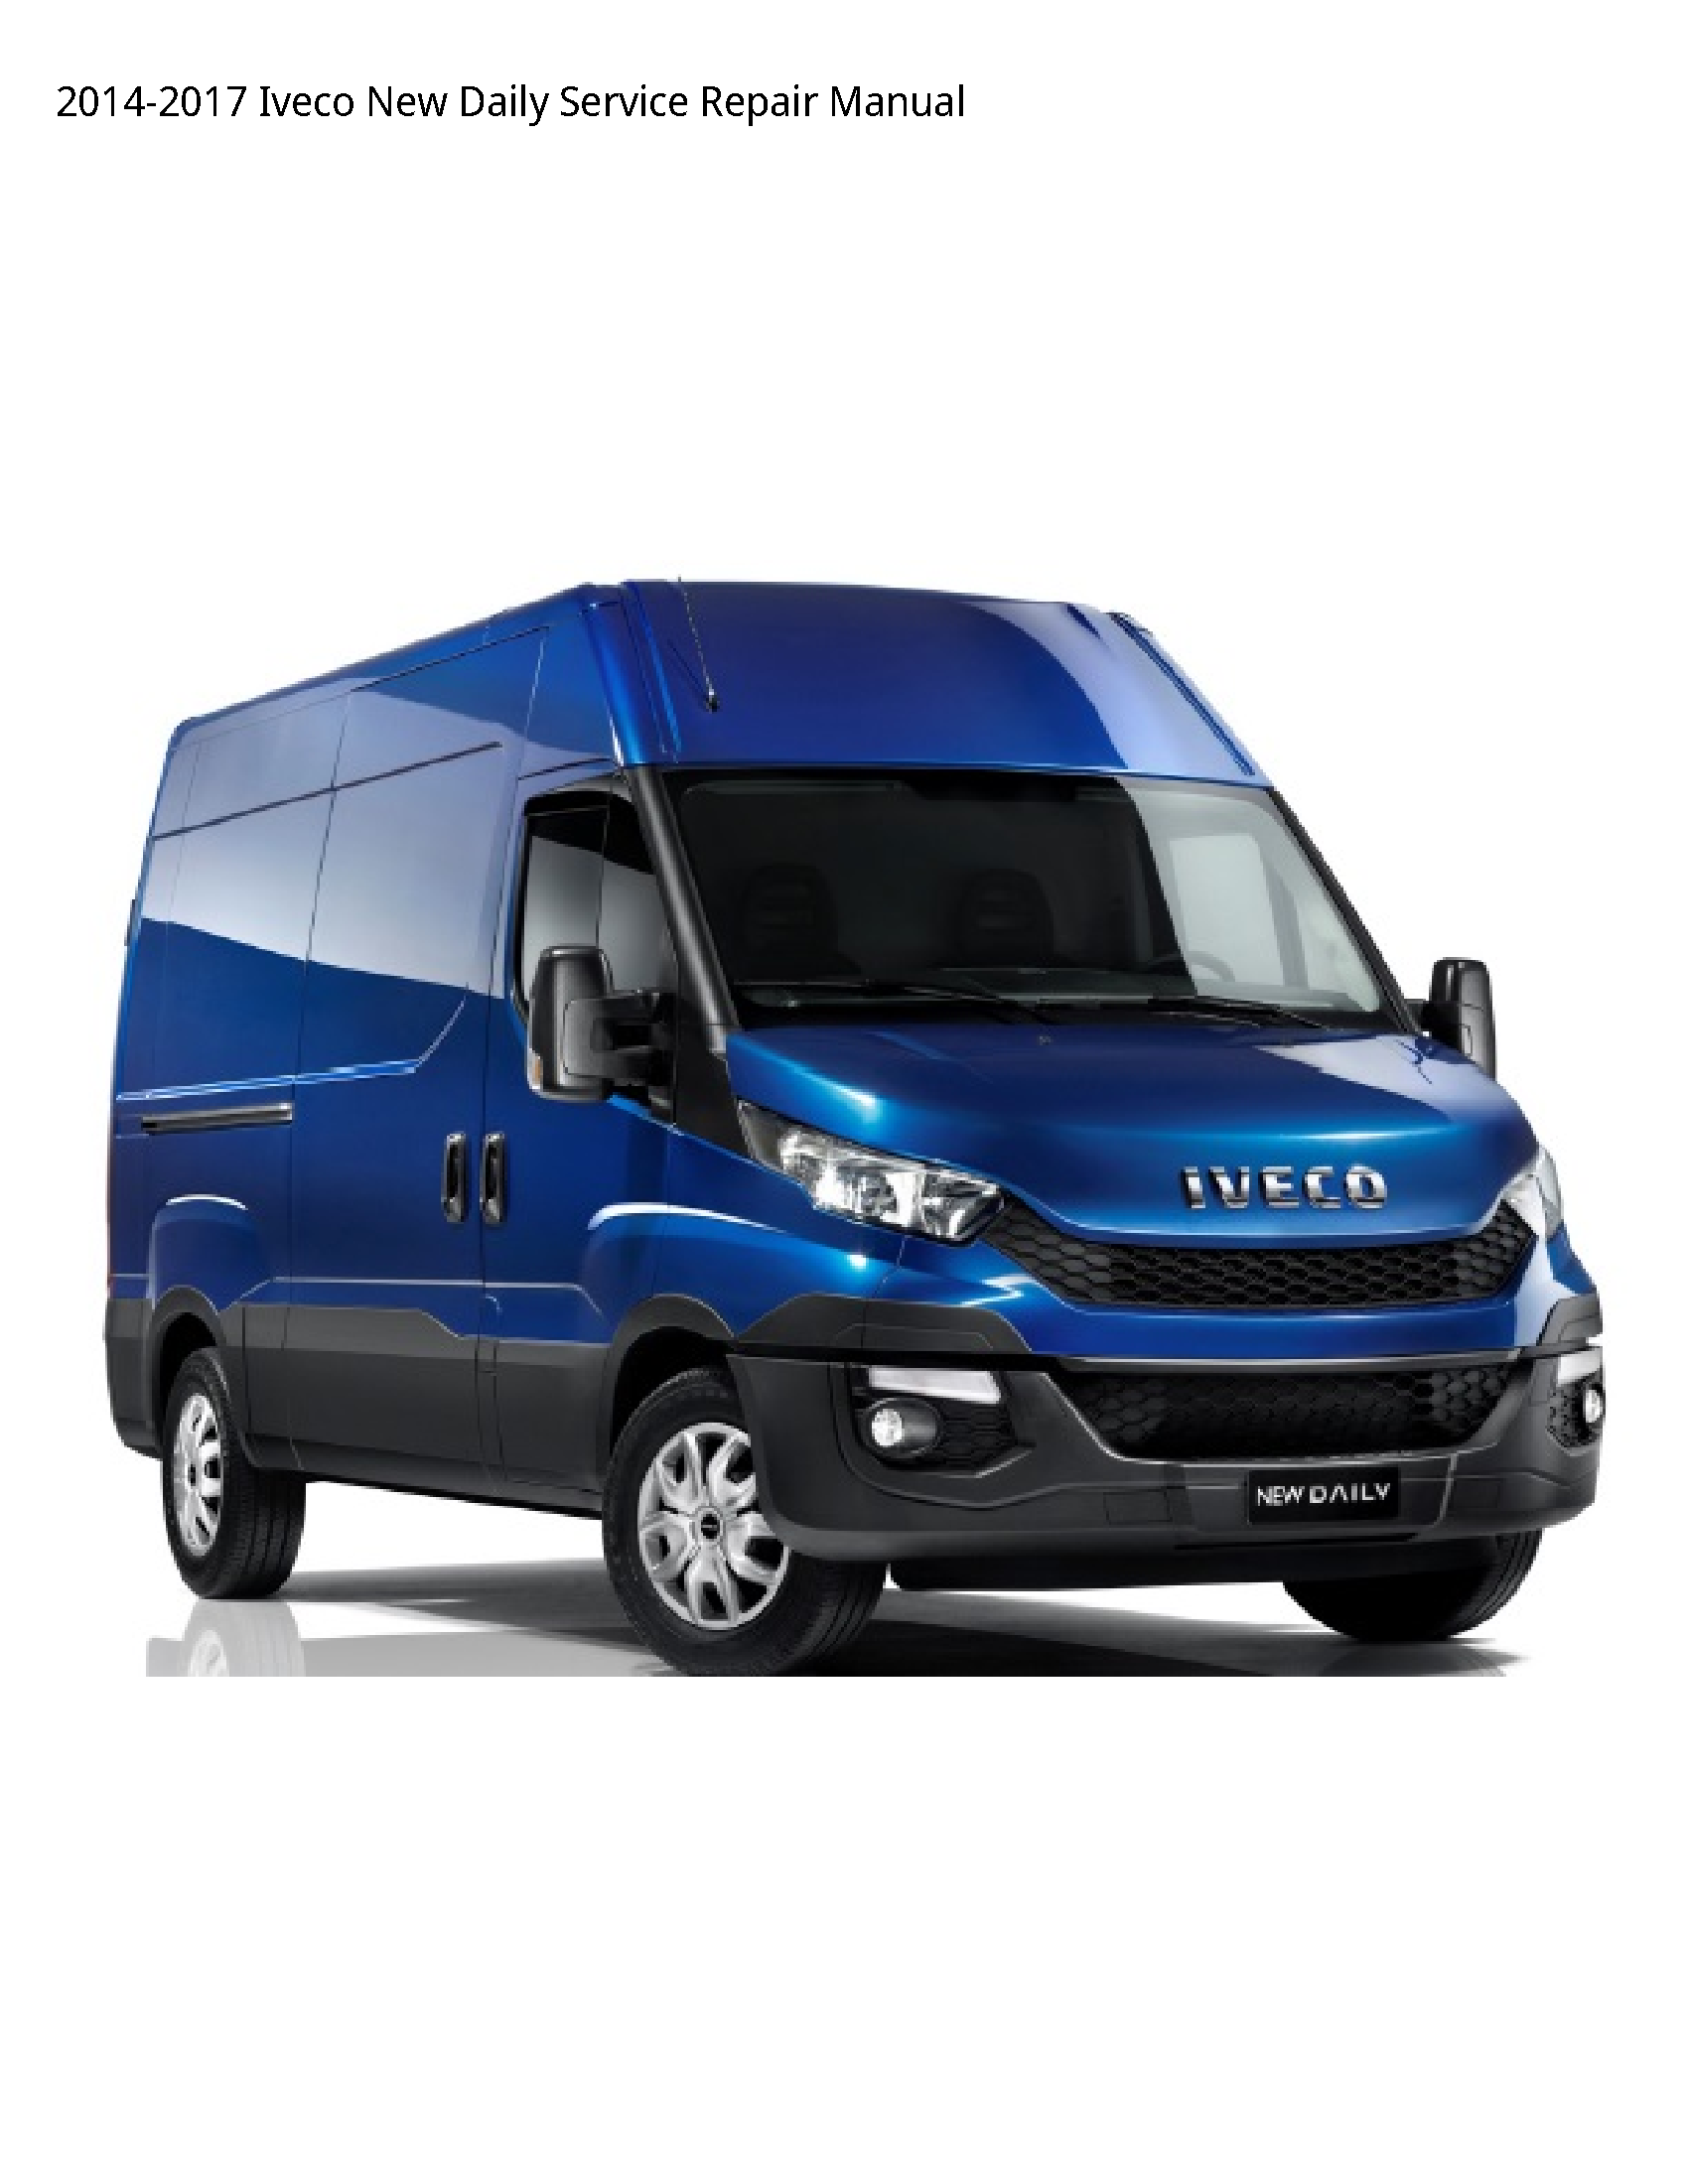 Iveco New Daily manual